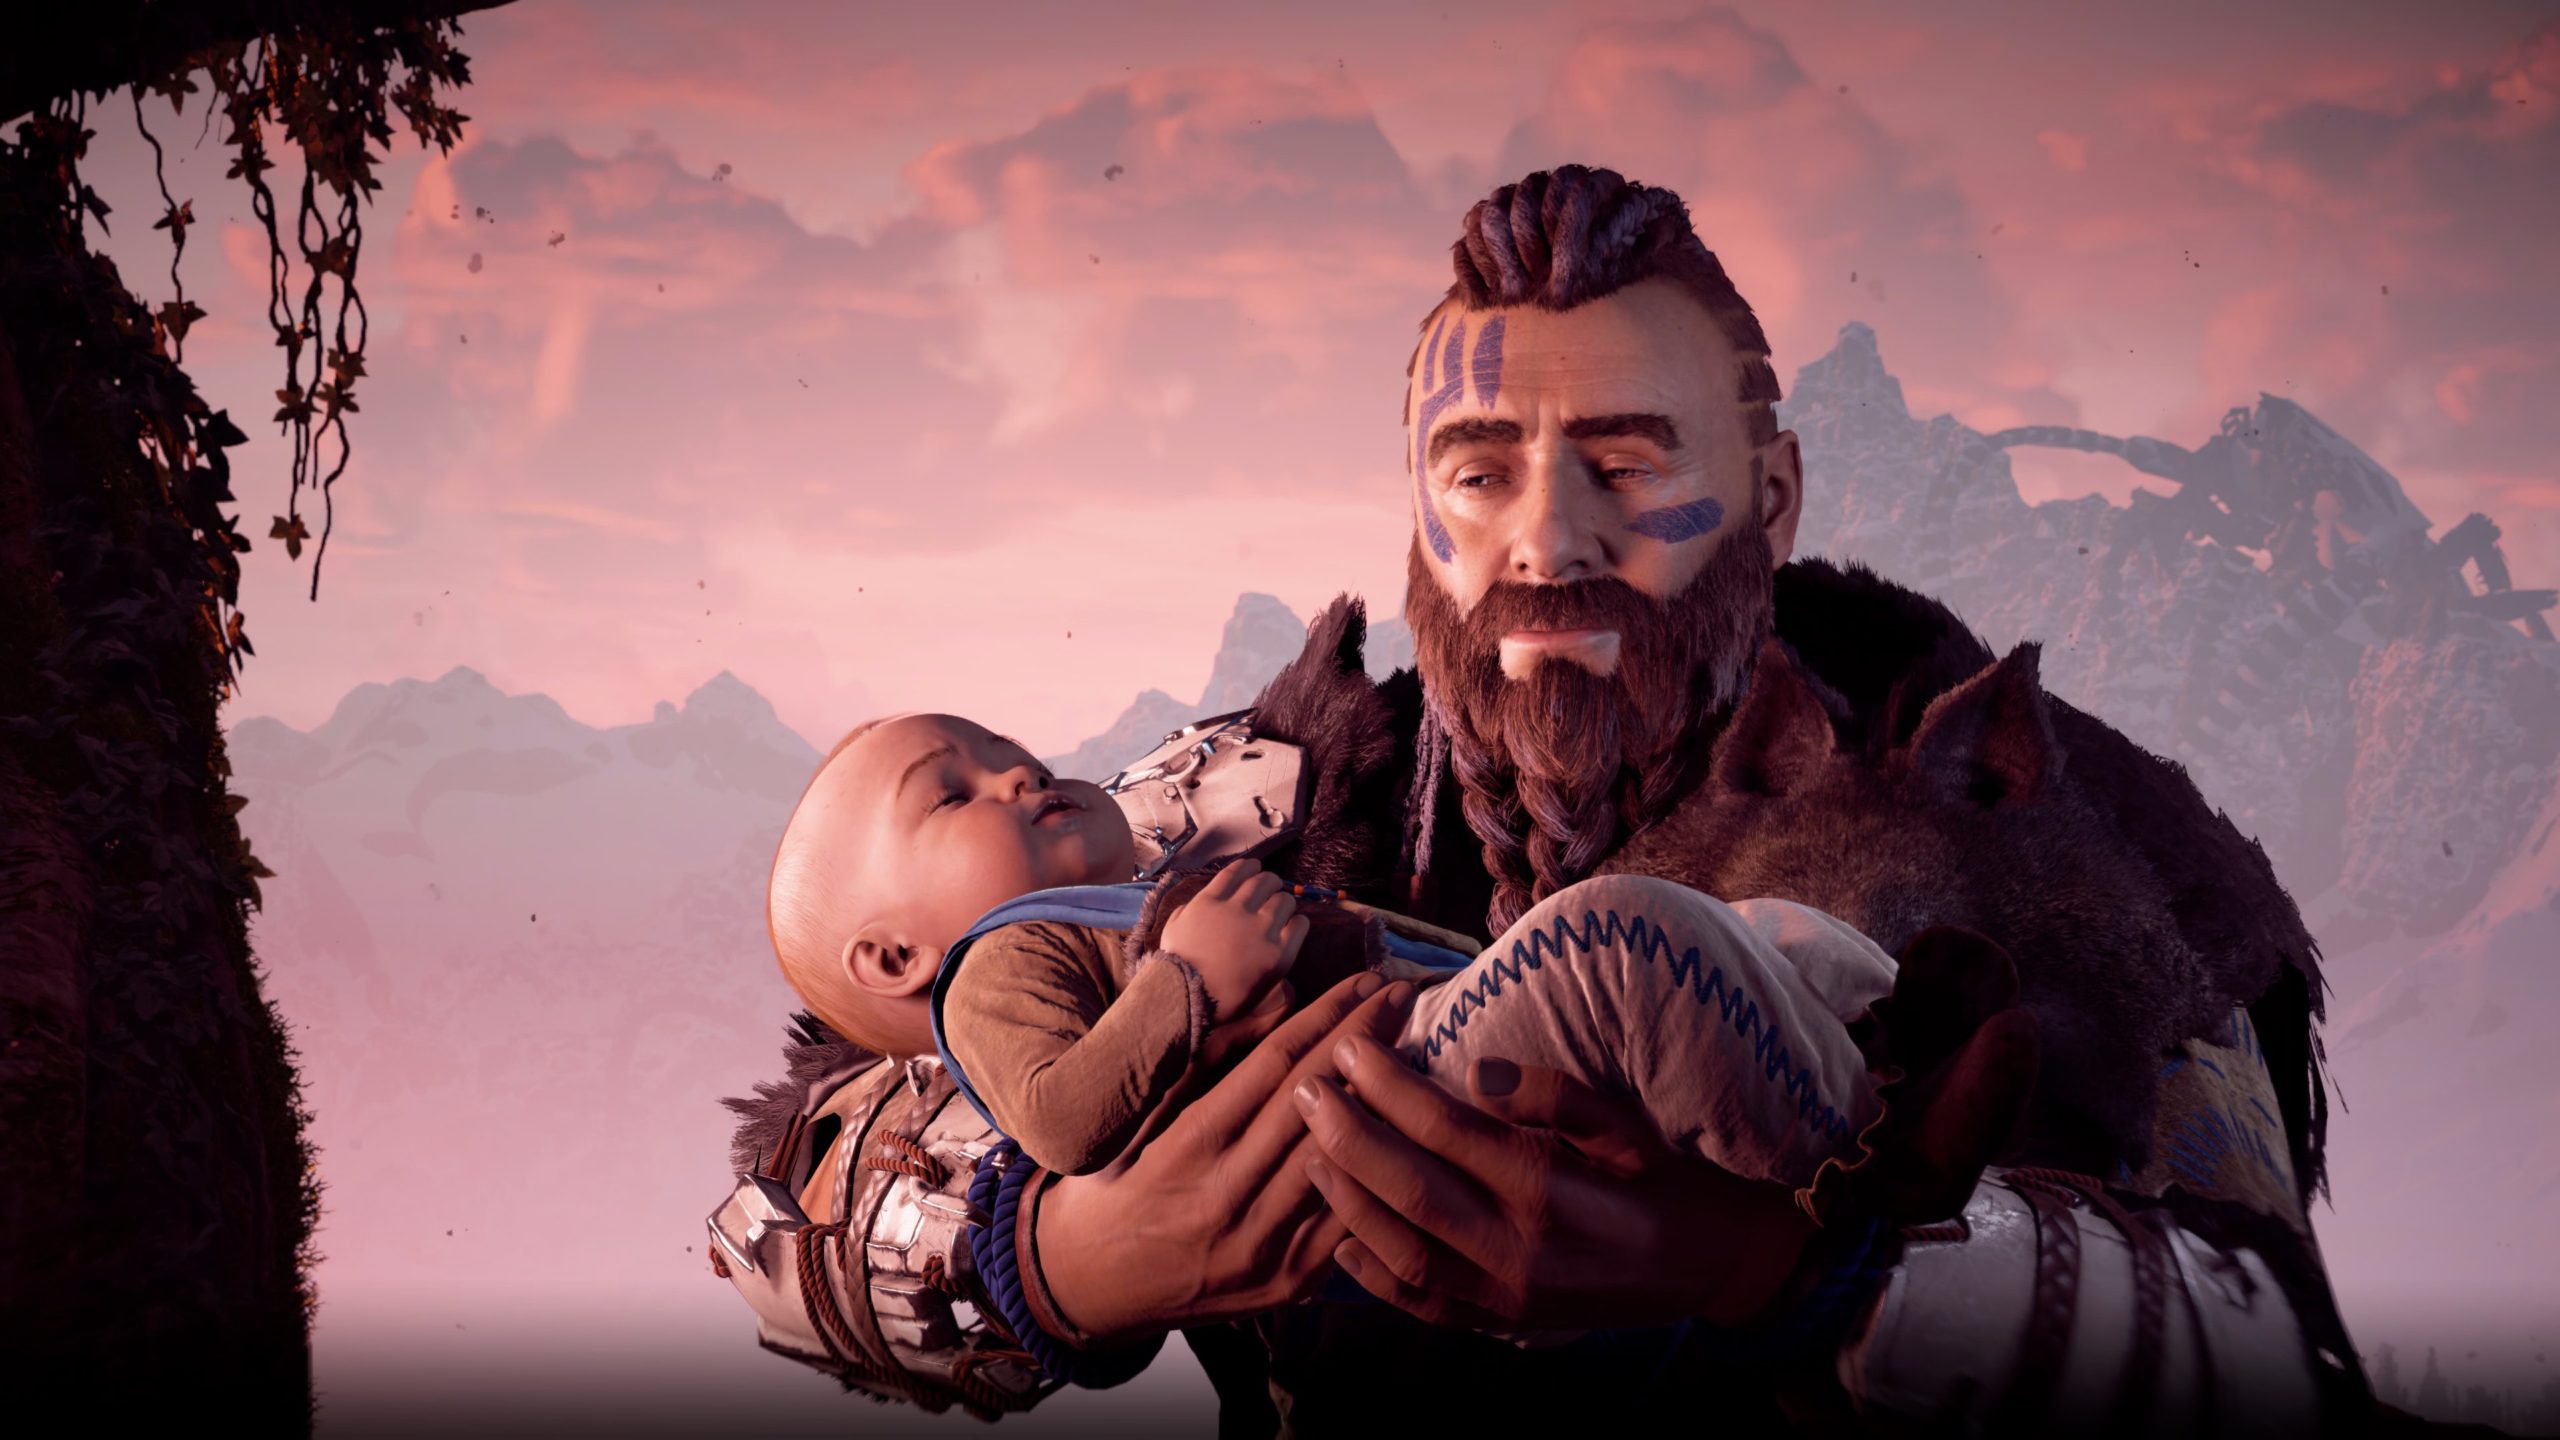 Horizon Zero Dawn Review: almost unplayable and an insult to buyers, benchmarks included